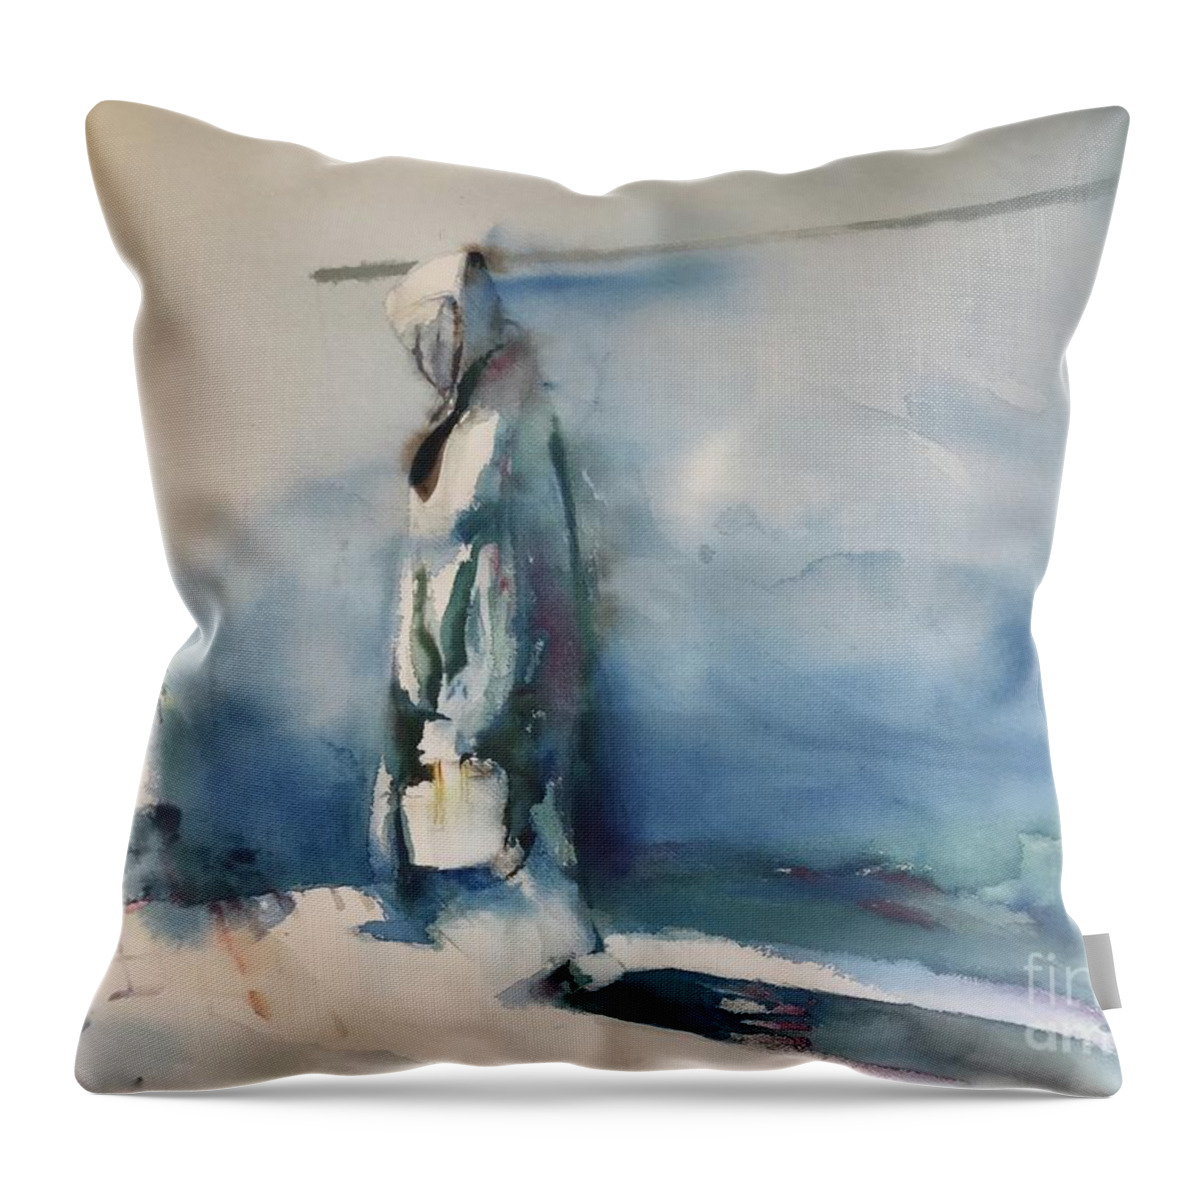 #walkintothesun #man #walking #morocco #watercolor #watercolorpainting #glenneff #picturerockstudio #thesoundpoetsmusic Throw Pillow featuring the painting Walk Into the Sun by Glen Neff